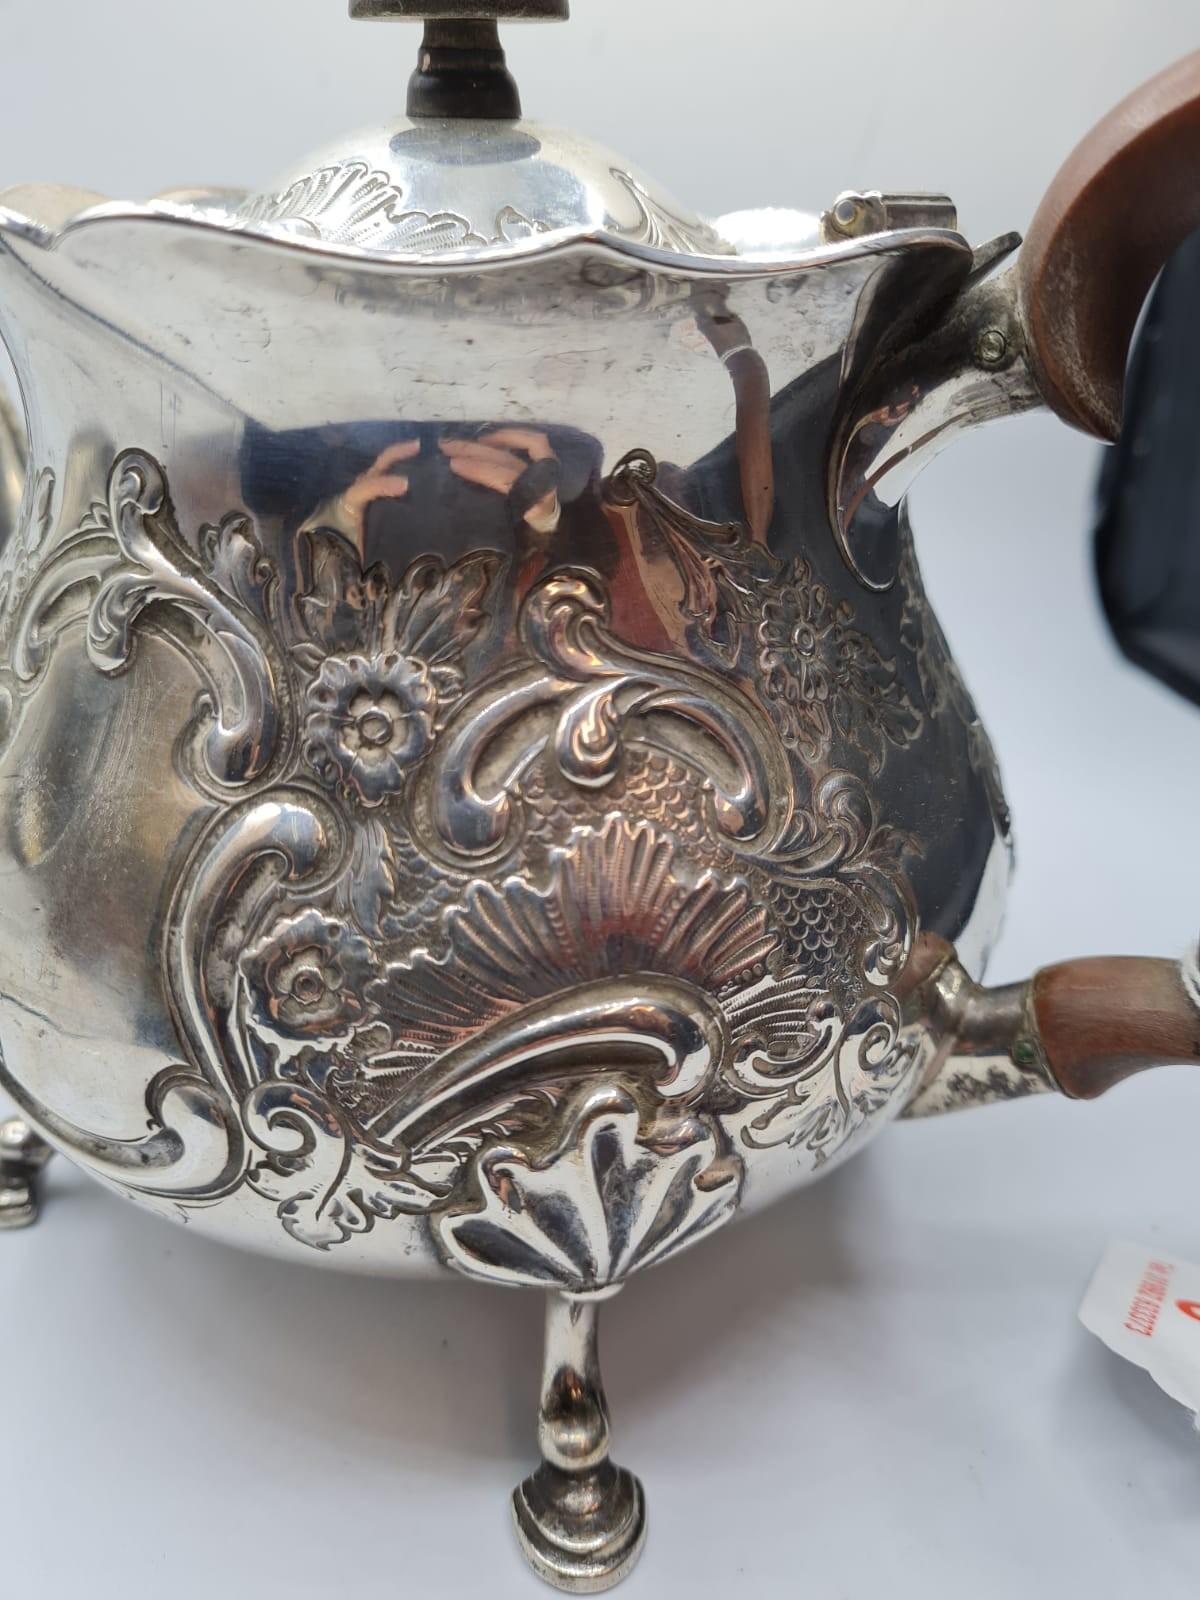 1920 Ornate Silver Teapot 766g - Image 2 of 8